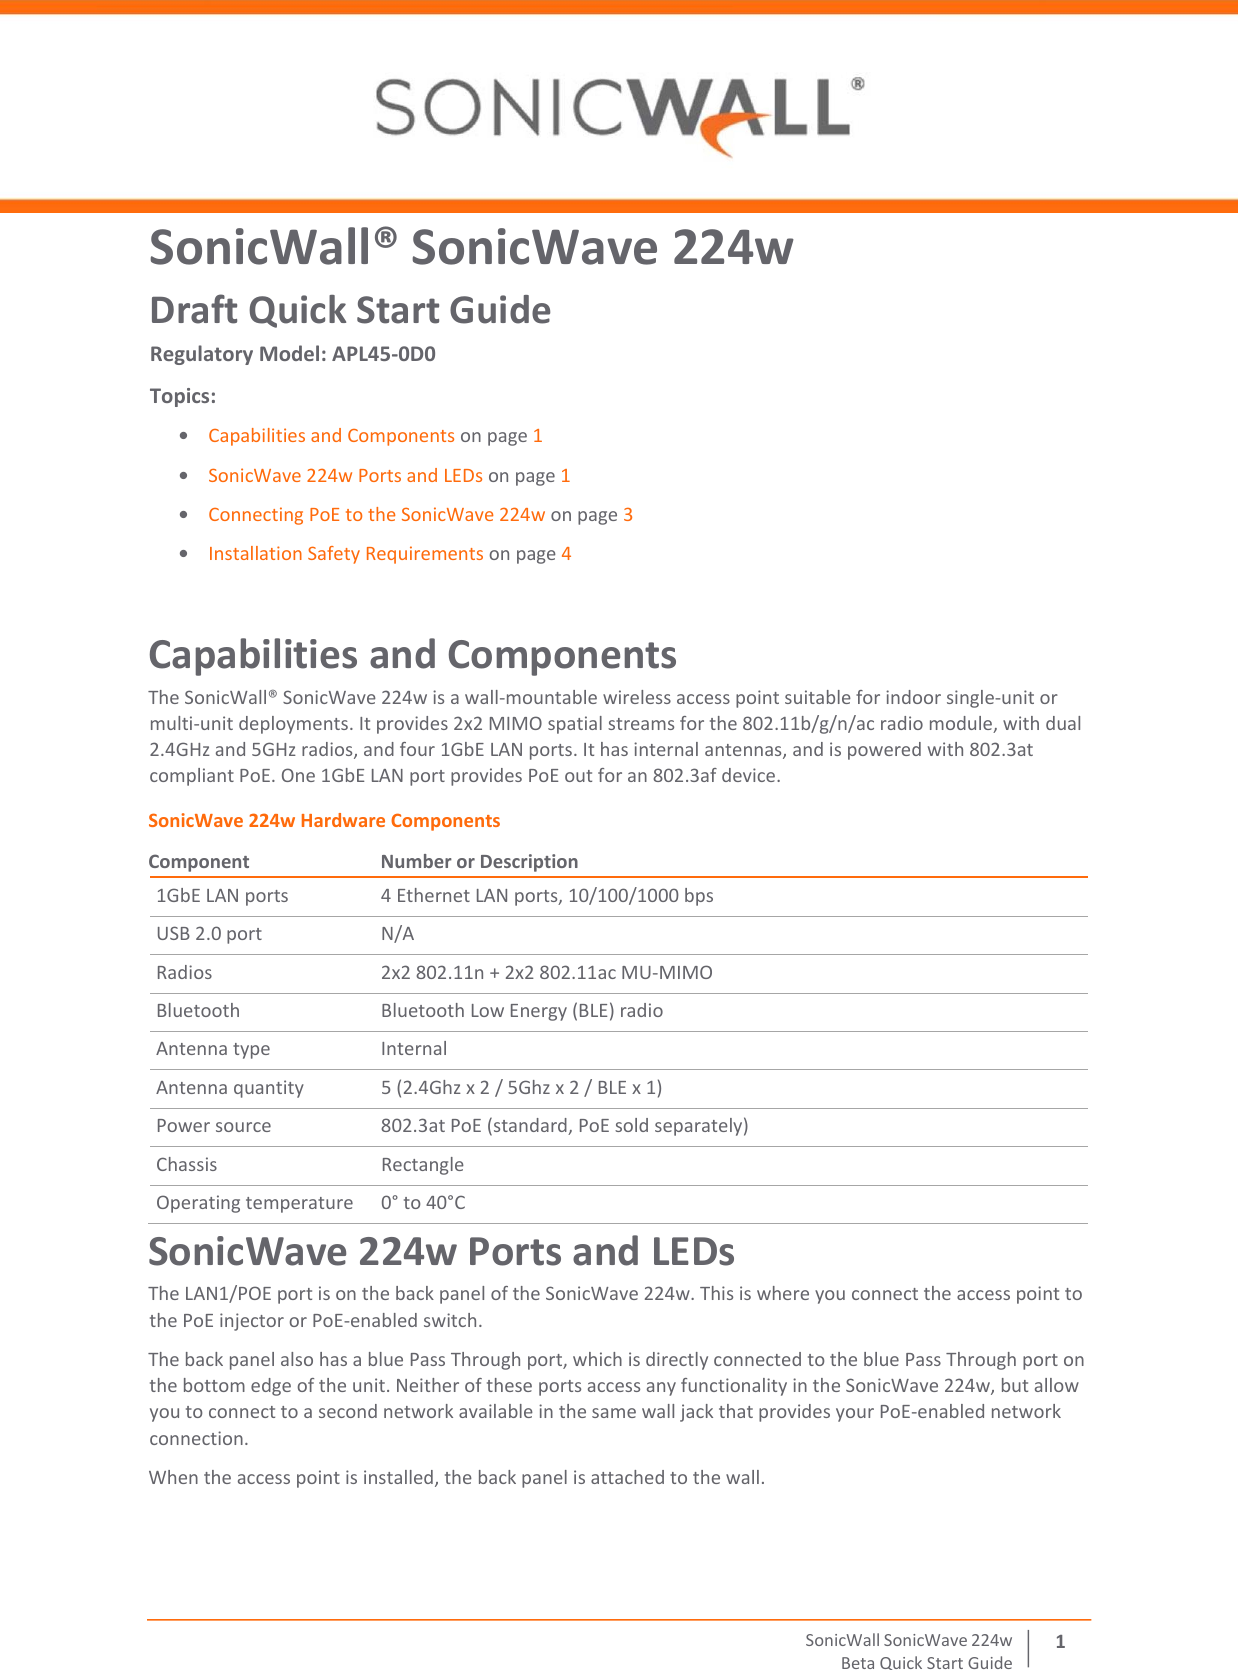  SonicWall   SonicWave   224 w Beta   Quick   Start   Guide 1 SonicWall® SonicWave 224w Draft Quick Start Guide Regulatory Model: APL45-0D0 Topics: • Capabilities and Components on page 1 • SonicWave 224w Ports and LEDs on page 1 • Connecting PoE to the SonicWave 224w on page 3 • Installation Safety Requirements on page 4 Capabilities and Components The SonicWall® SonicWave 224w is a wall‐mountable wireless access point suitable for indoor single‐unit or multi‐unit deployments. It provides 2x2 MIMO spatial streams for the 802.11b/g/n/ac radio module, with dual 2.4GHz and 5GHz radios, and four 1GbE LAN ports. It has internal antennas, and is powered with 802.3at compliant PoE. One 1GbE LAN port provides PoE out for an 802.3af device. SonicWave 224w Hardware Components Component  Number or Description 1GbE LAN ports 4 Ethernet LAN ports, 10/100/1000 bps USB 2.0 port N/A Radios 2x2 802.11n + 2x2 802.11ac MU‐MIMO Bluetooth Bluetooth Low Energy (BLE) radio Antenna type Internal Antenna quantity 5 (2.4Ghz x 2 / 5Ghz x 2 / BLE x 1) Power source 802.3at PoE (standard, PoE sold separately) Chassis Rectangle Operating temperature 0° to 40°C SonicWave 224w Ports and LEDs The LAN1/POE port is on the back panel of the SonicWave 224w. This is where you connect the access point to the PoE injector or PoE‐enabled switch.  The back panel also has a blue Pass Through port, which is directly connected to the blue Pass Through port on the bottom edge of the unit. Neither of these ports access any functionality in the SonicWave 224w, but allow you to connect to a second network available in the same wall jack that provides your PoE‐enabled network connection. When the access point is installed, the back panel is attached to the wall. 